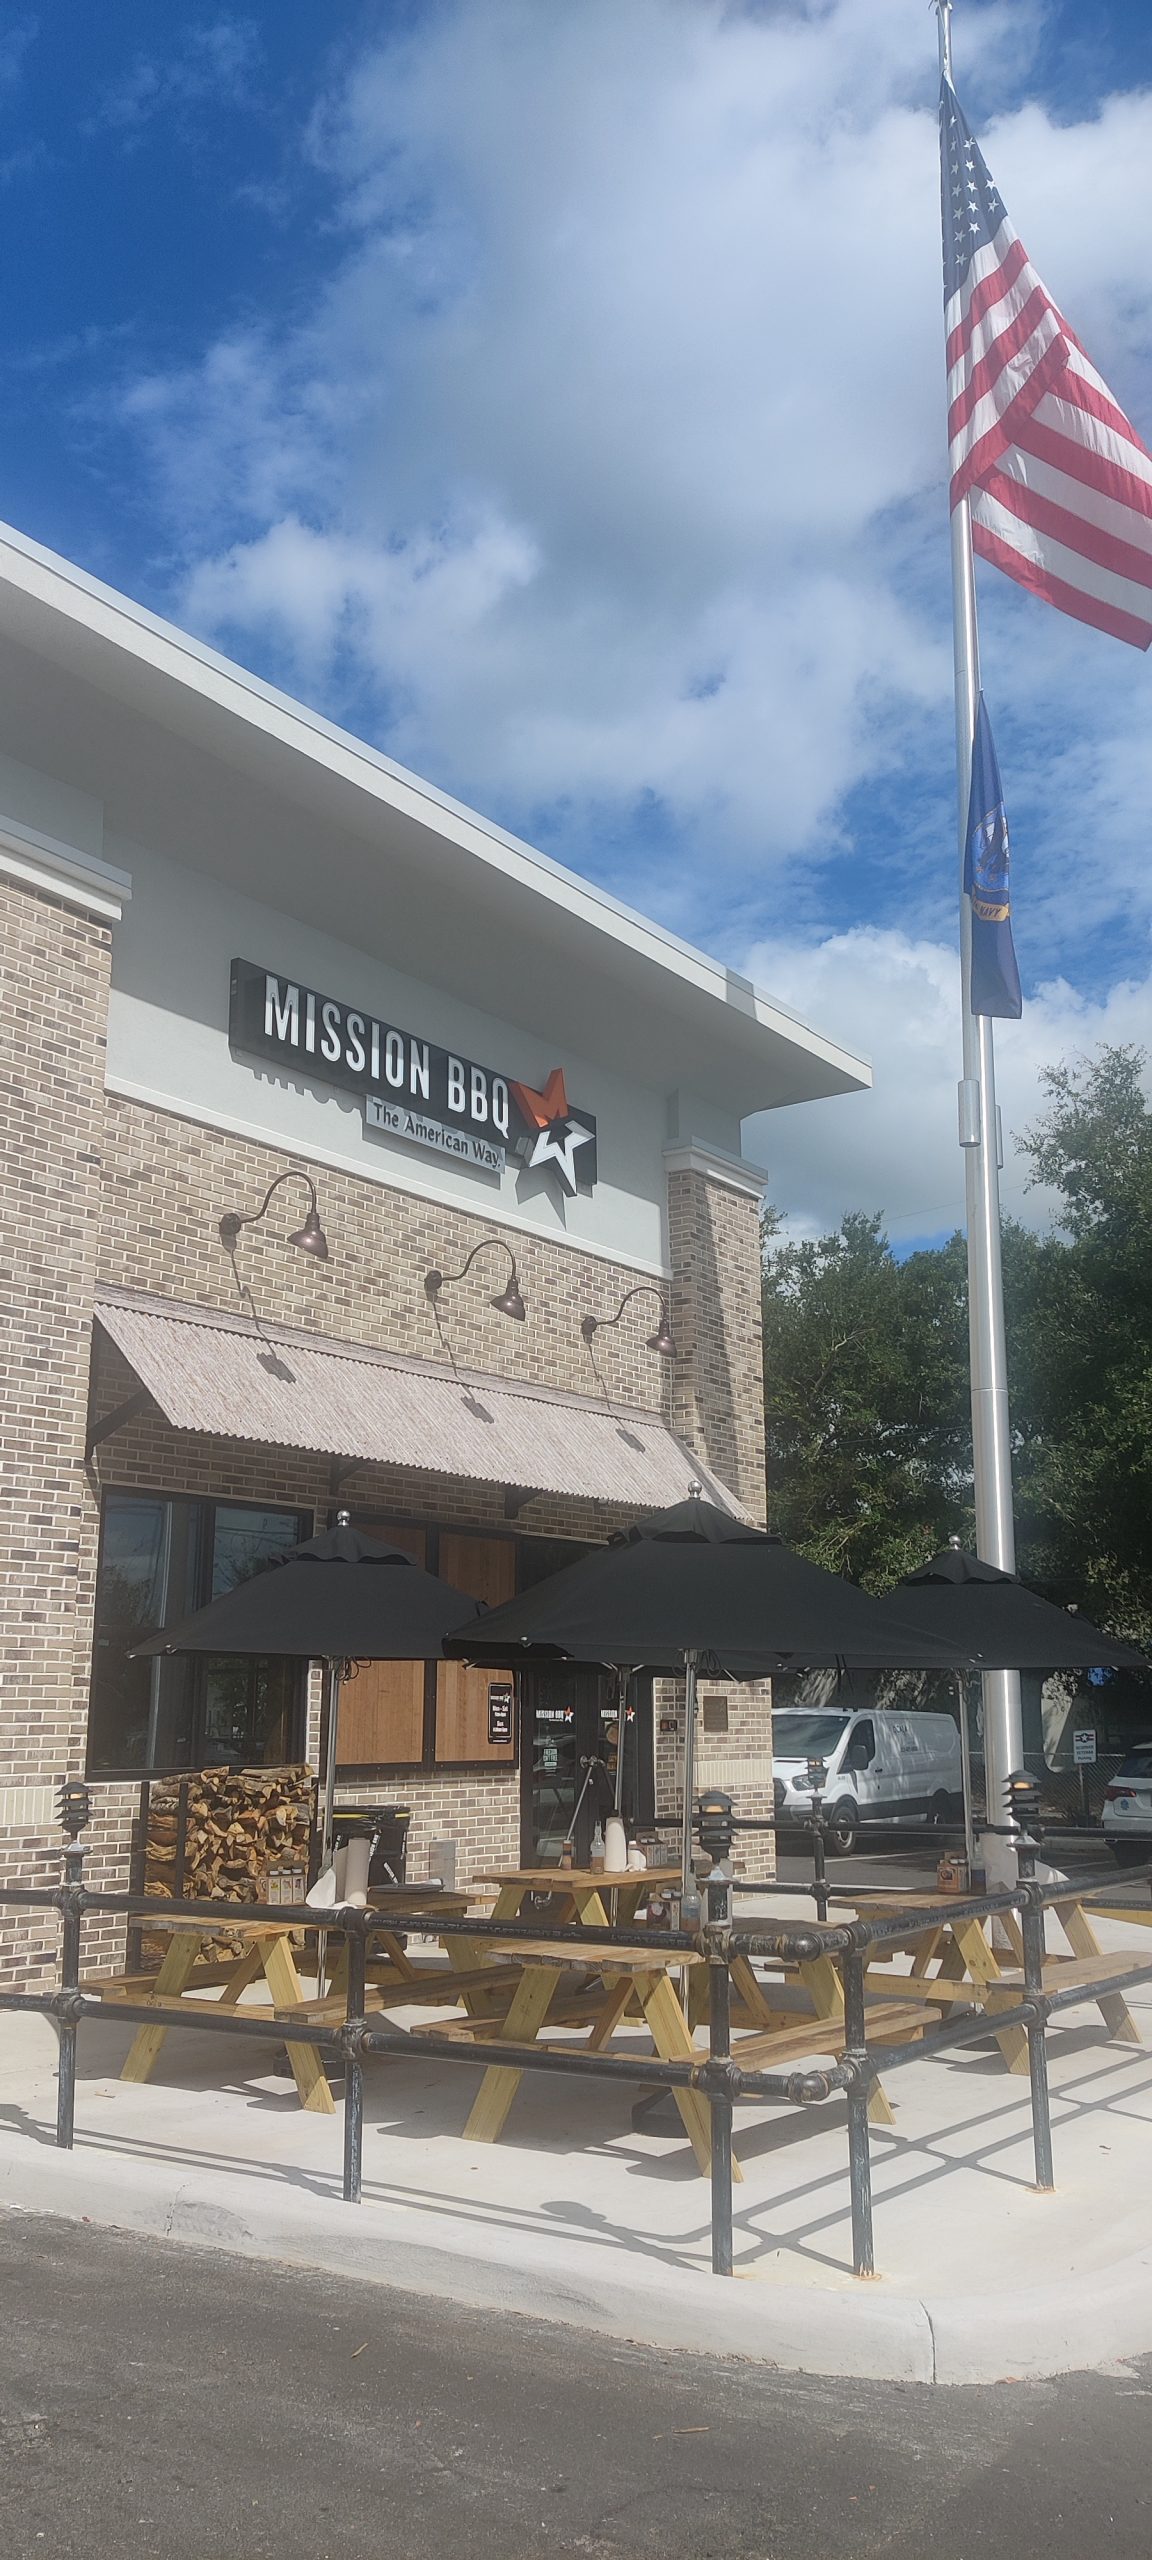 10-13-2022 Mission BBQ Opens in Ocala